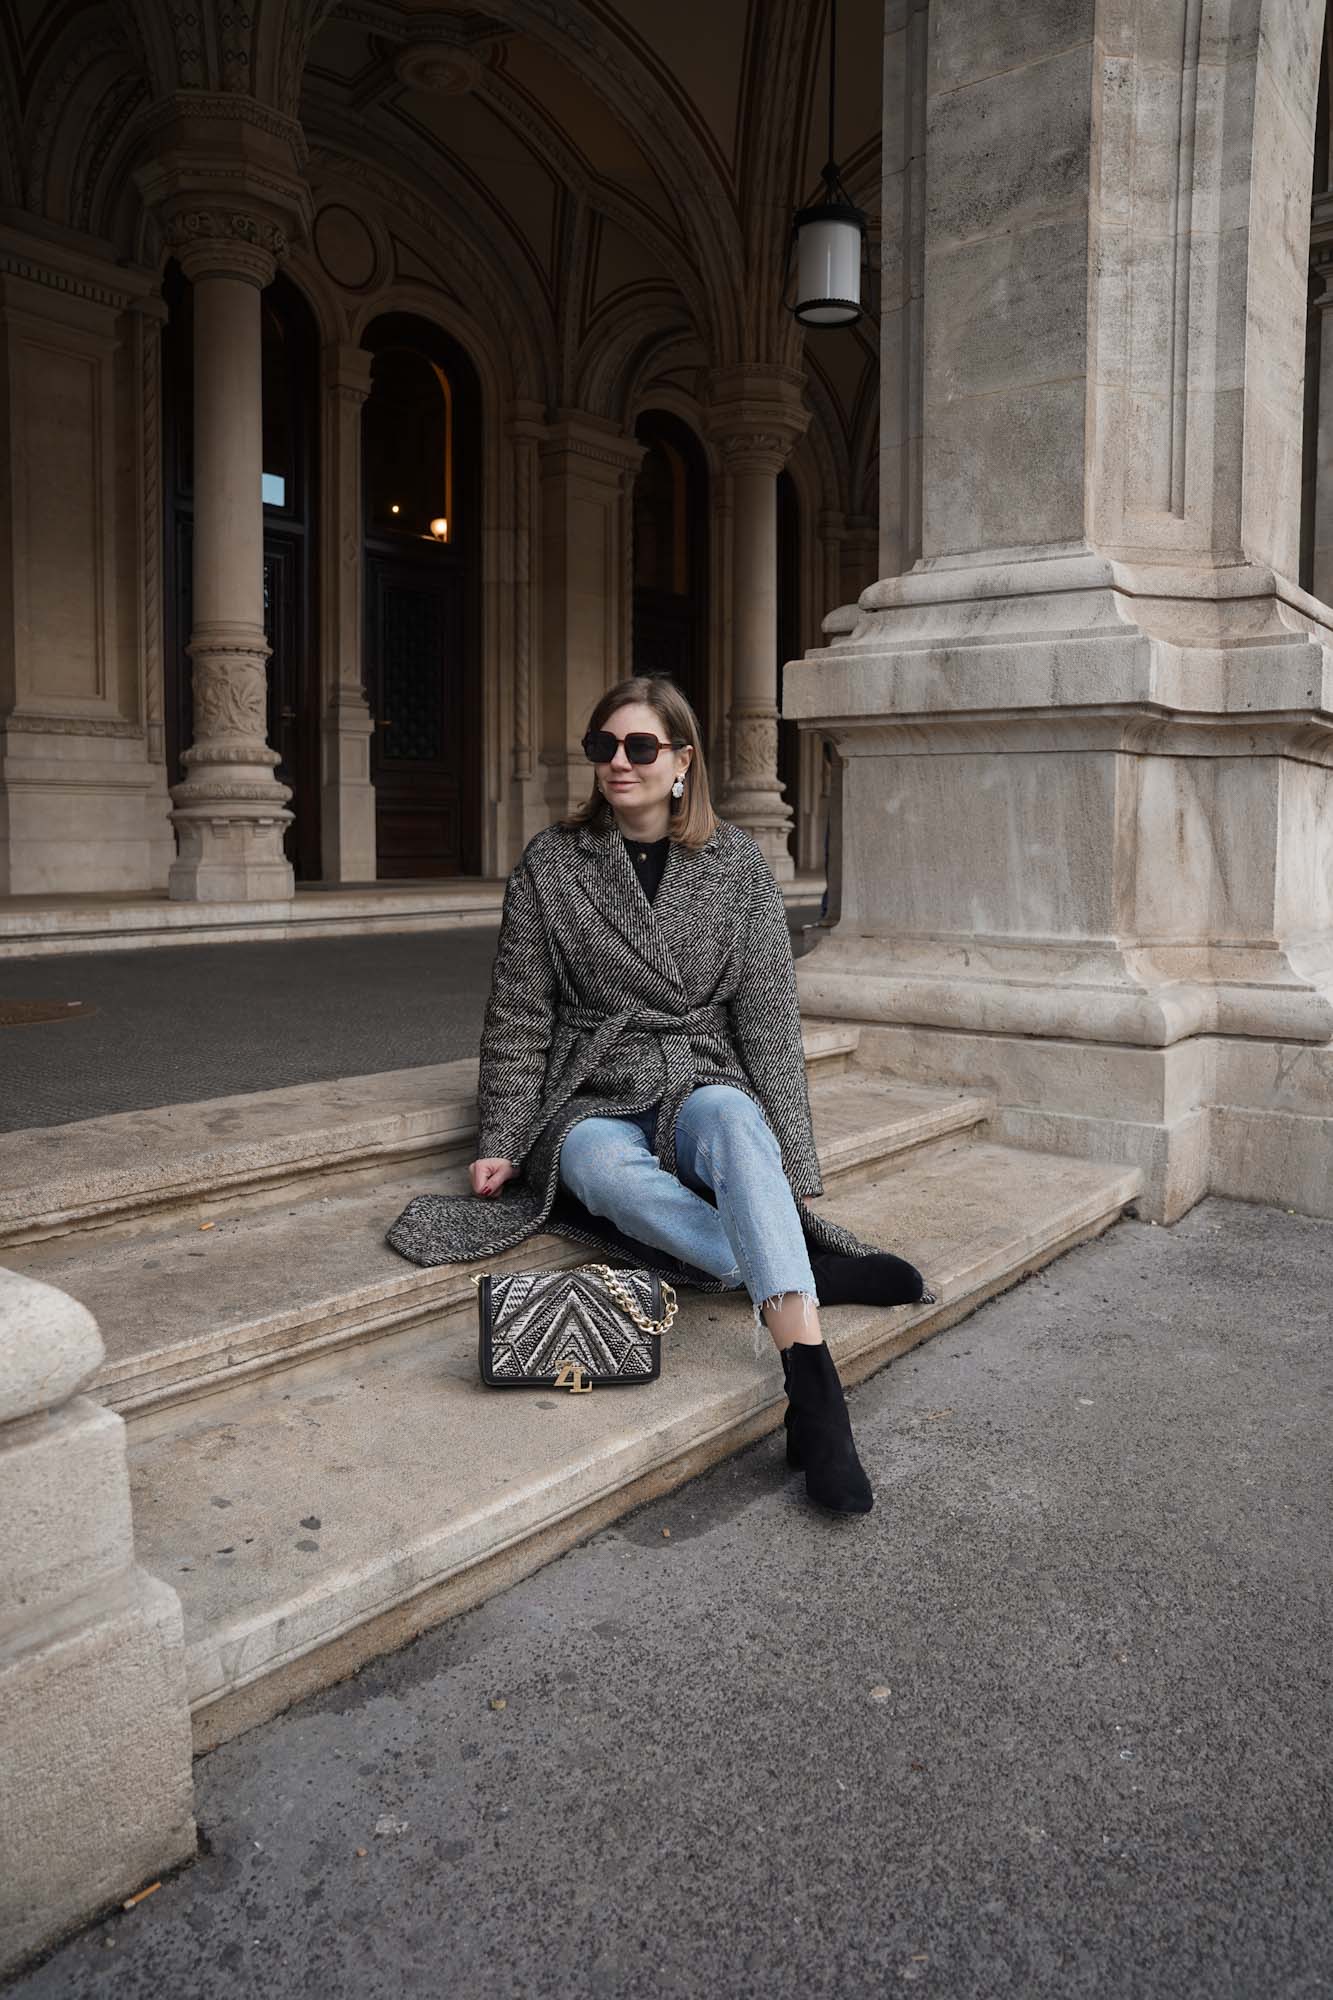 Winter coat, jeans, black boots, Stiefeletten, casual, outfit winter Vienna city 